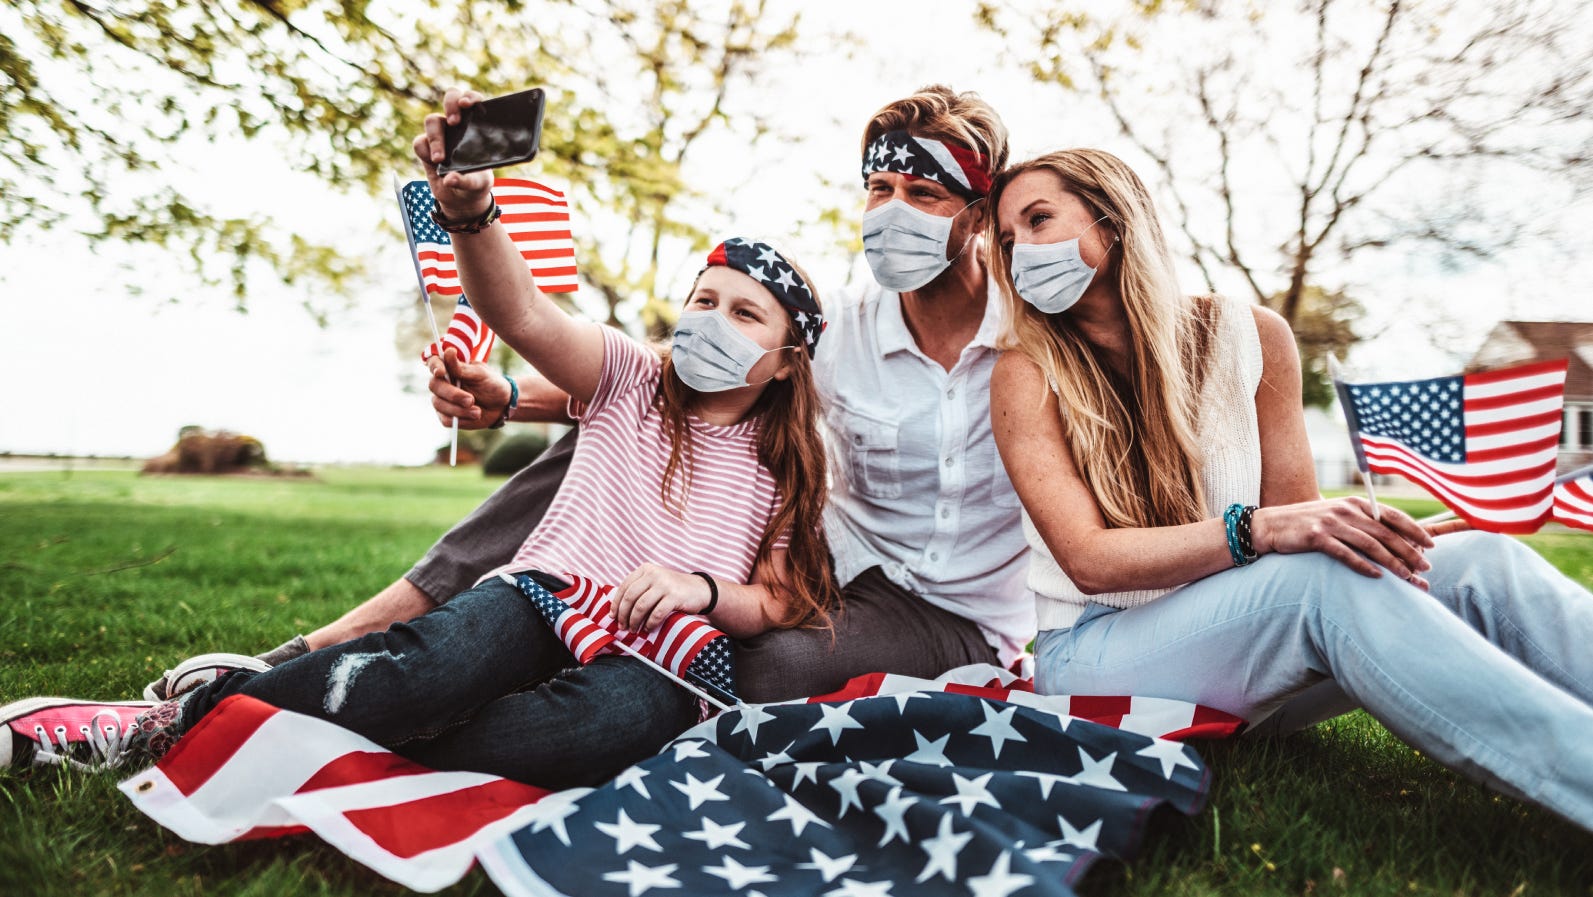 How To Safely Celebrate The 4th Of July During The COVID 19 Pandemic